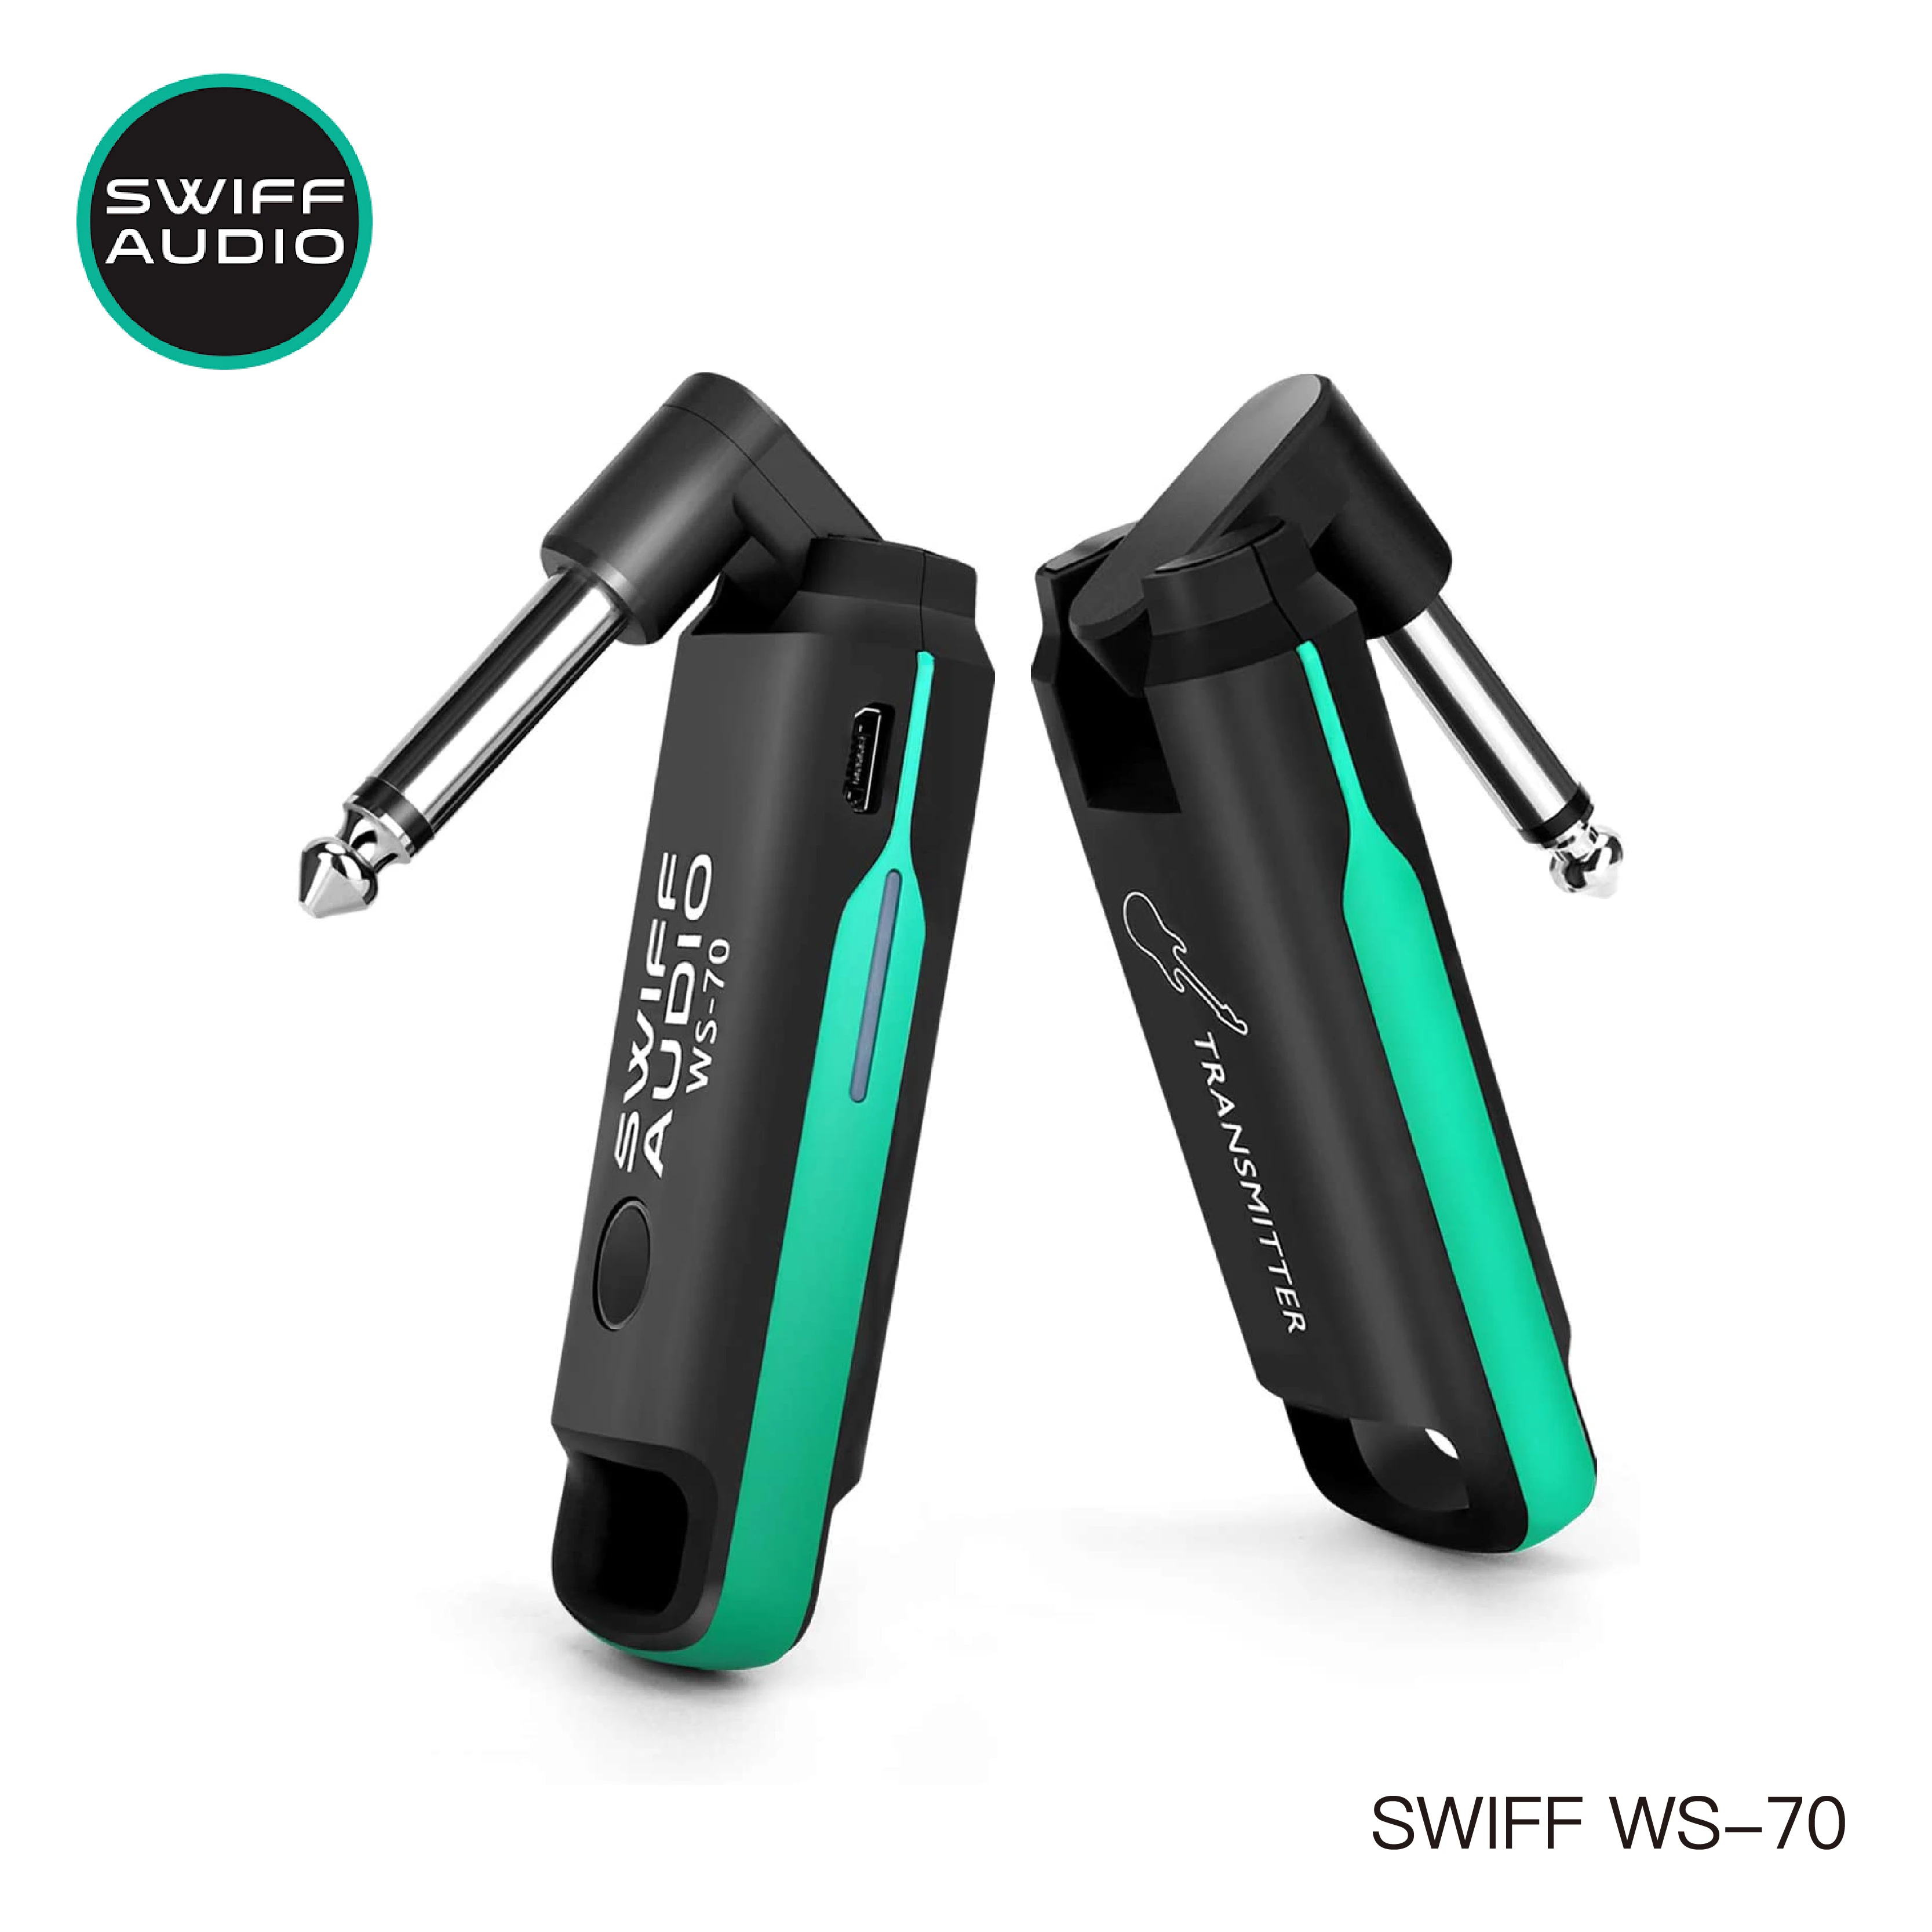 SWIFF WS-70 I Guitar Wireless Transmitter And Receiver – Low-Latency And High Audio Reproduction